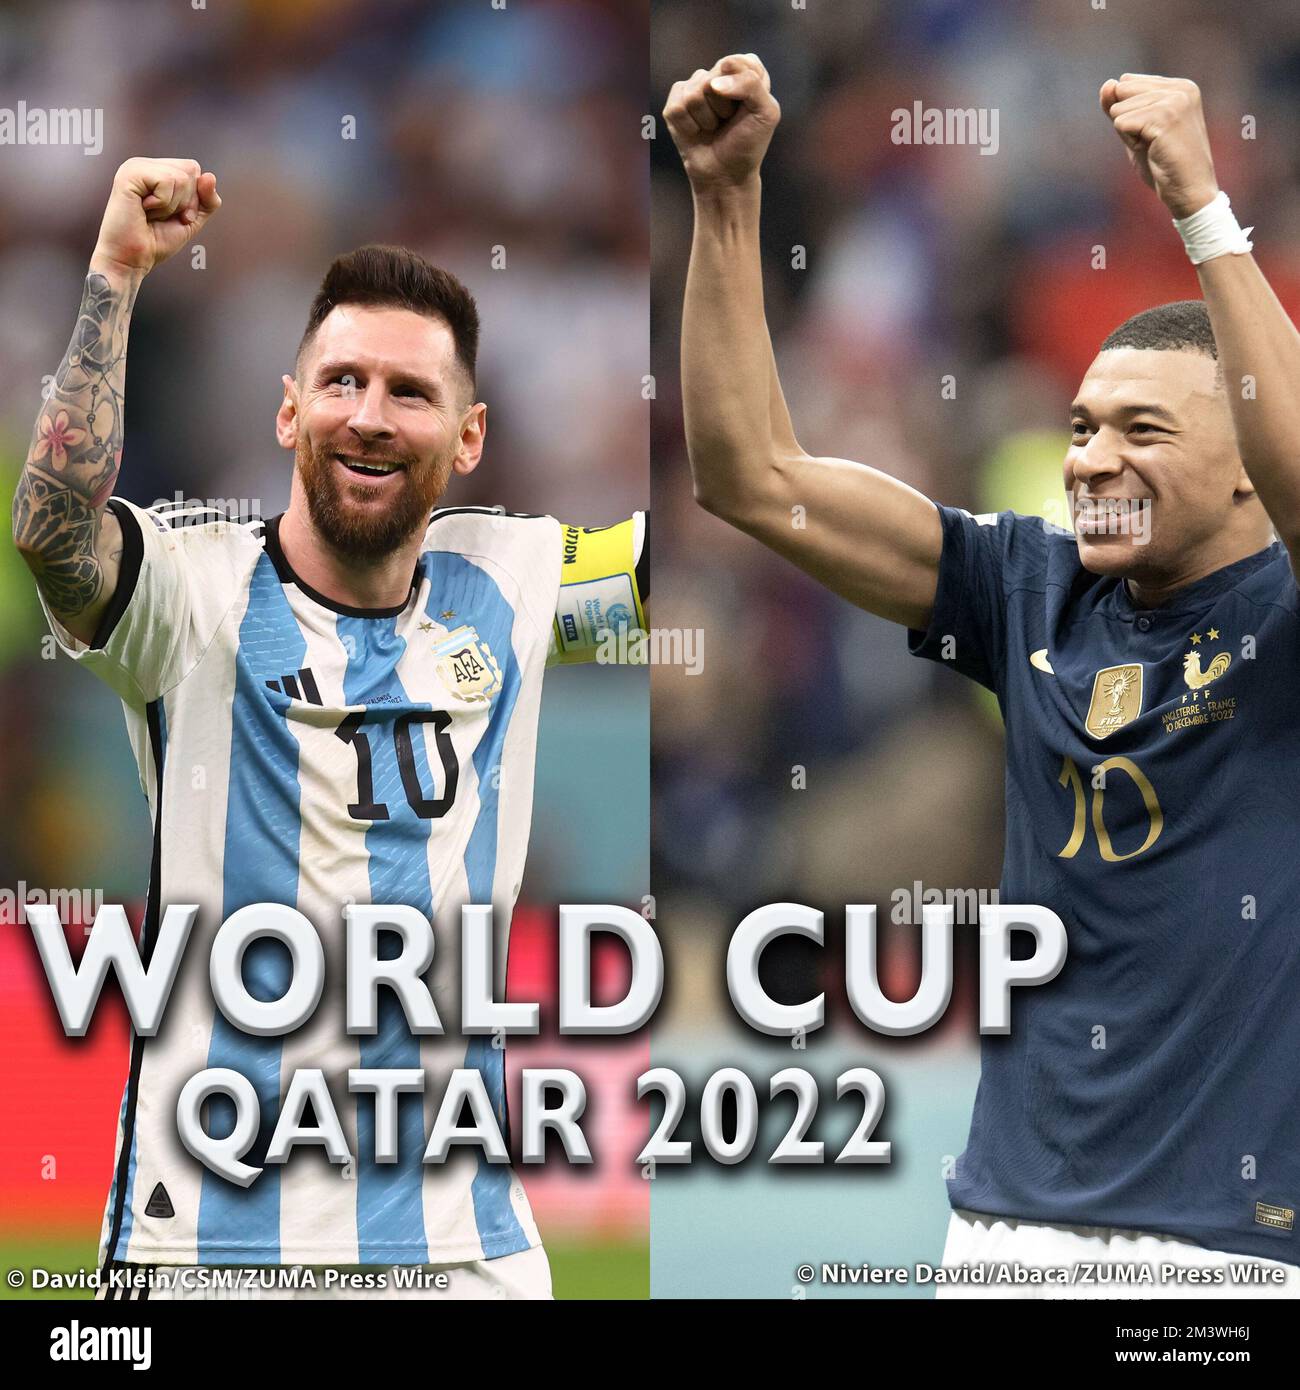 FIFA World Cup finals are on Sunday December 18, 2022, hosted by Qatar, between Argentina and France. Whoever wins it will be third time